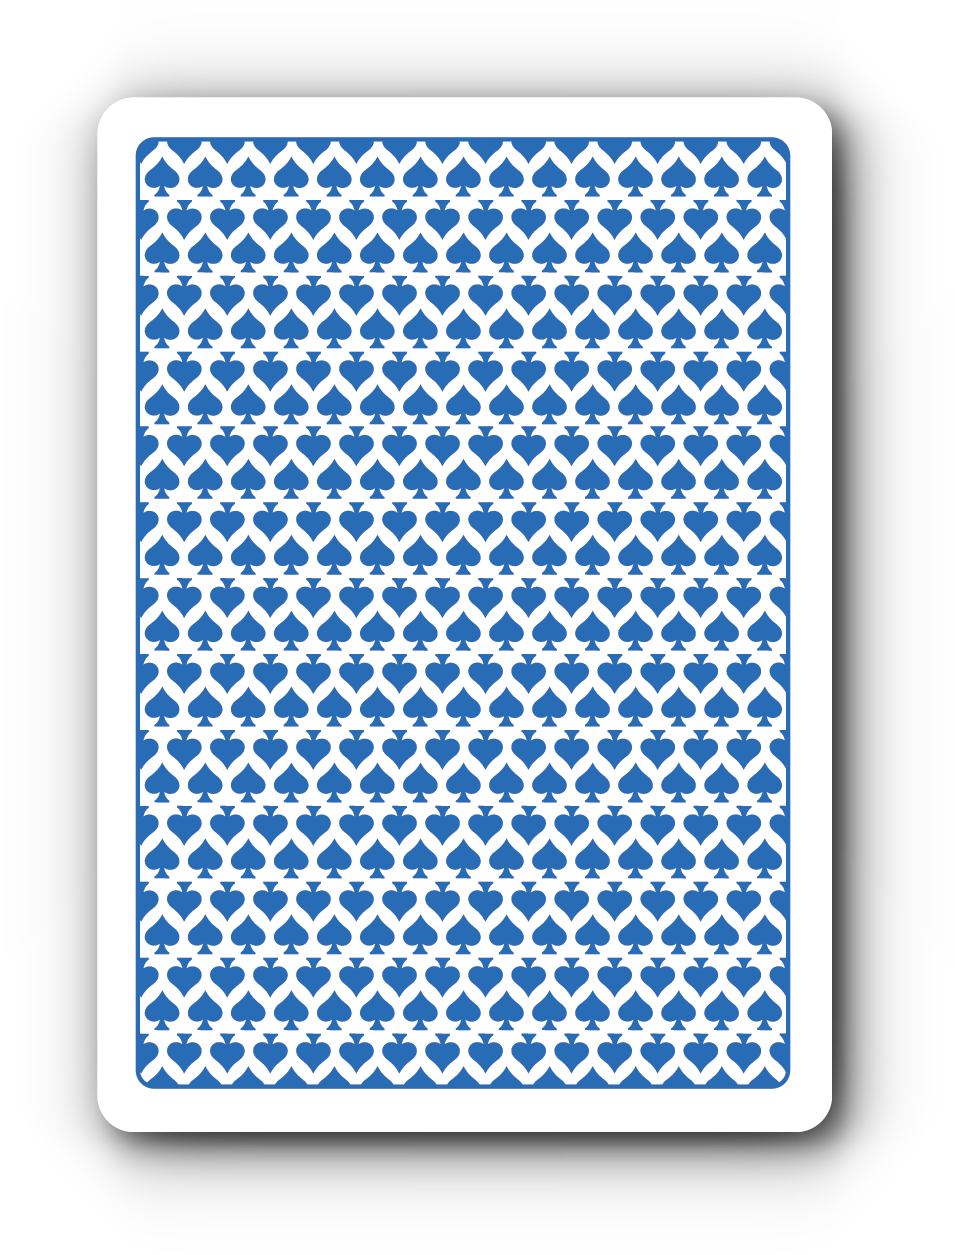 Faded Spade 100% Plastic Poker Playing Cards